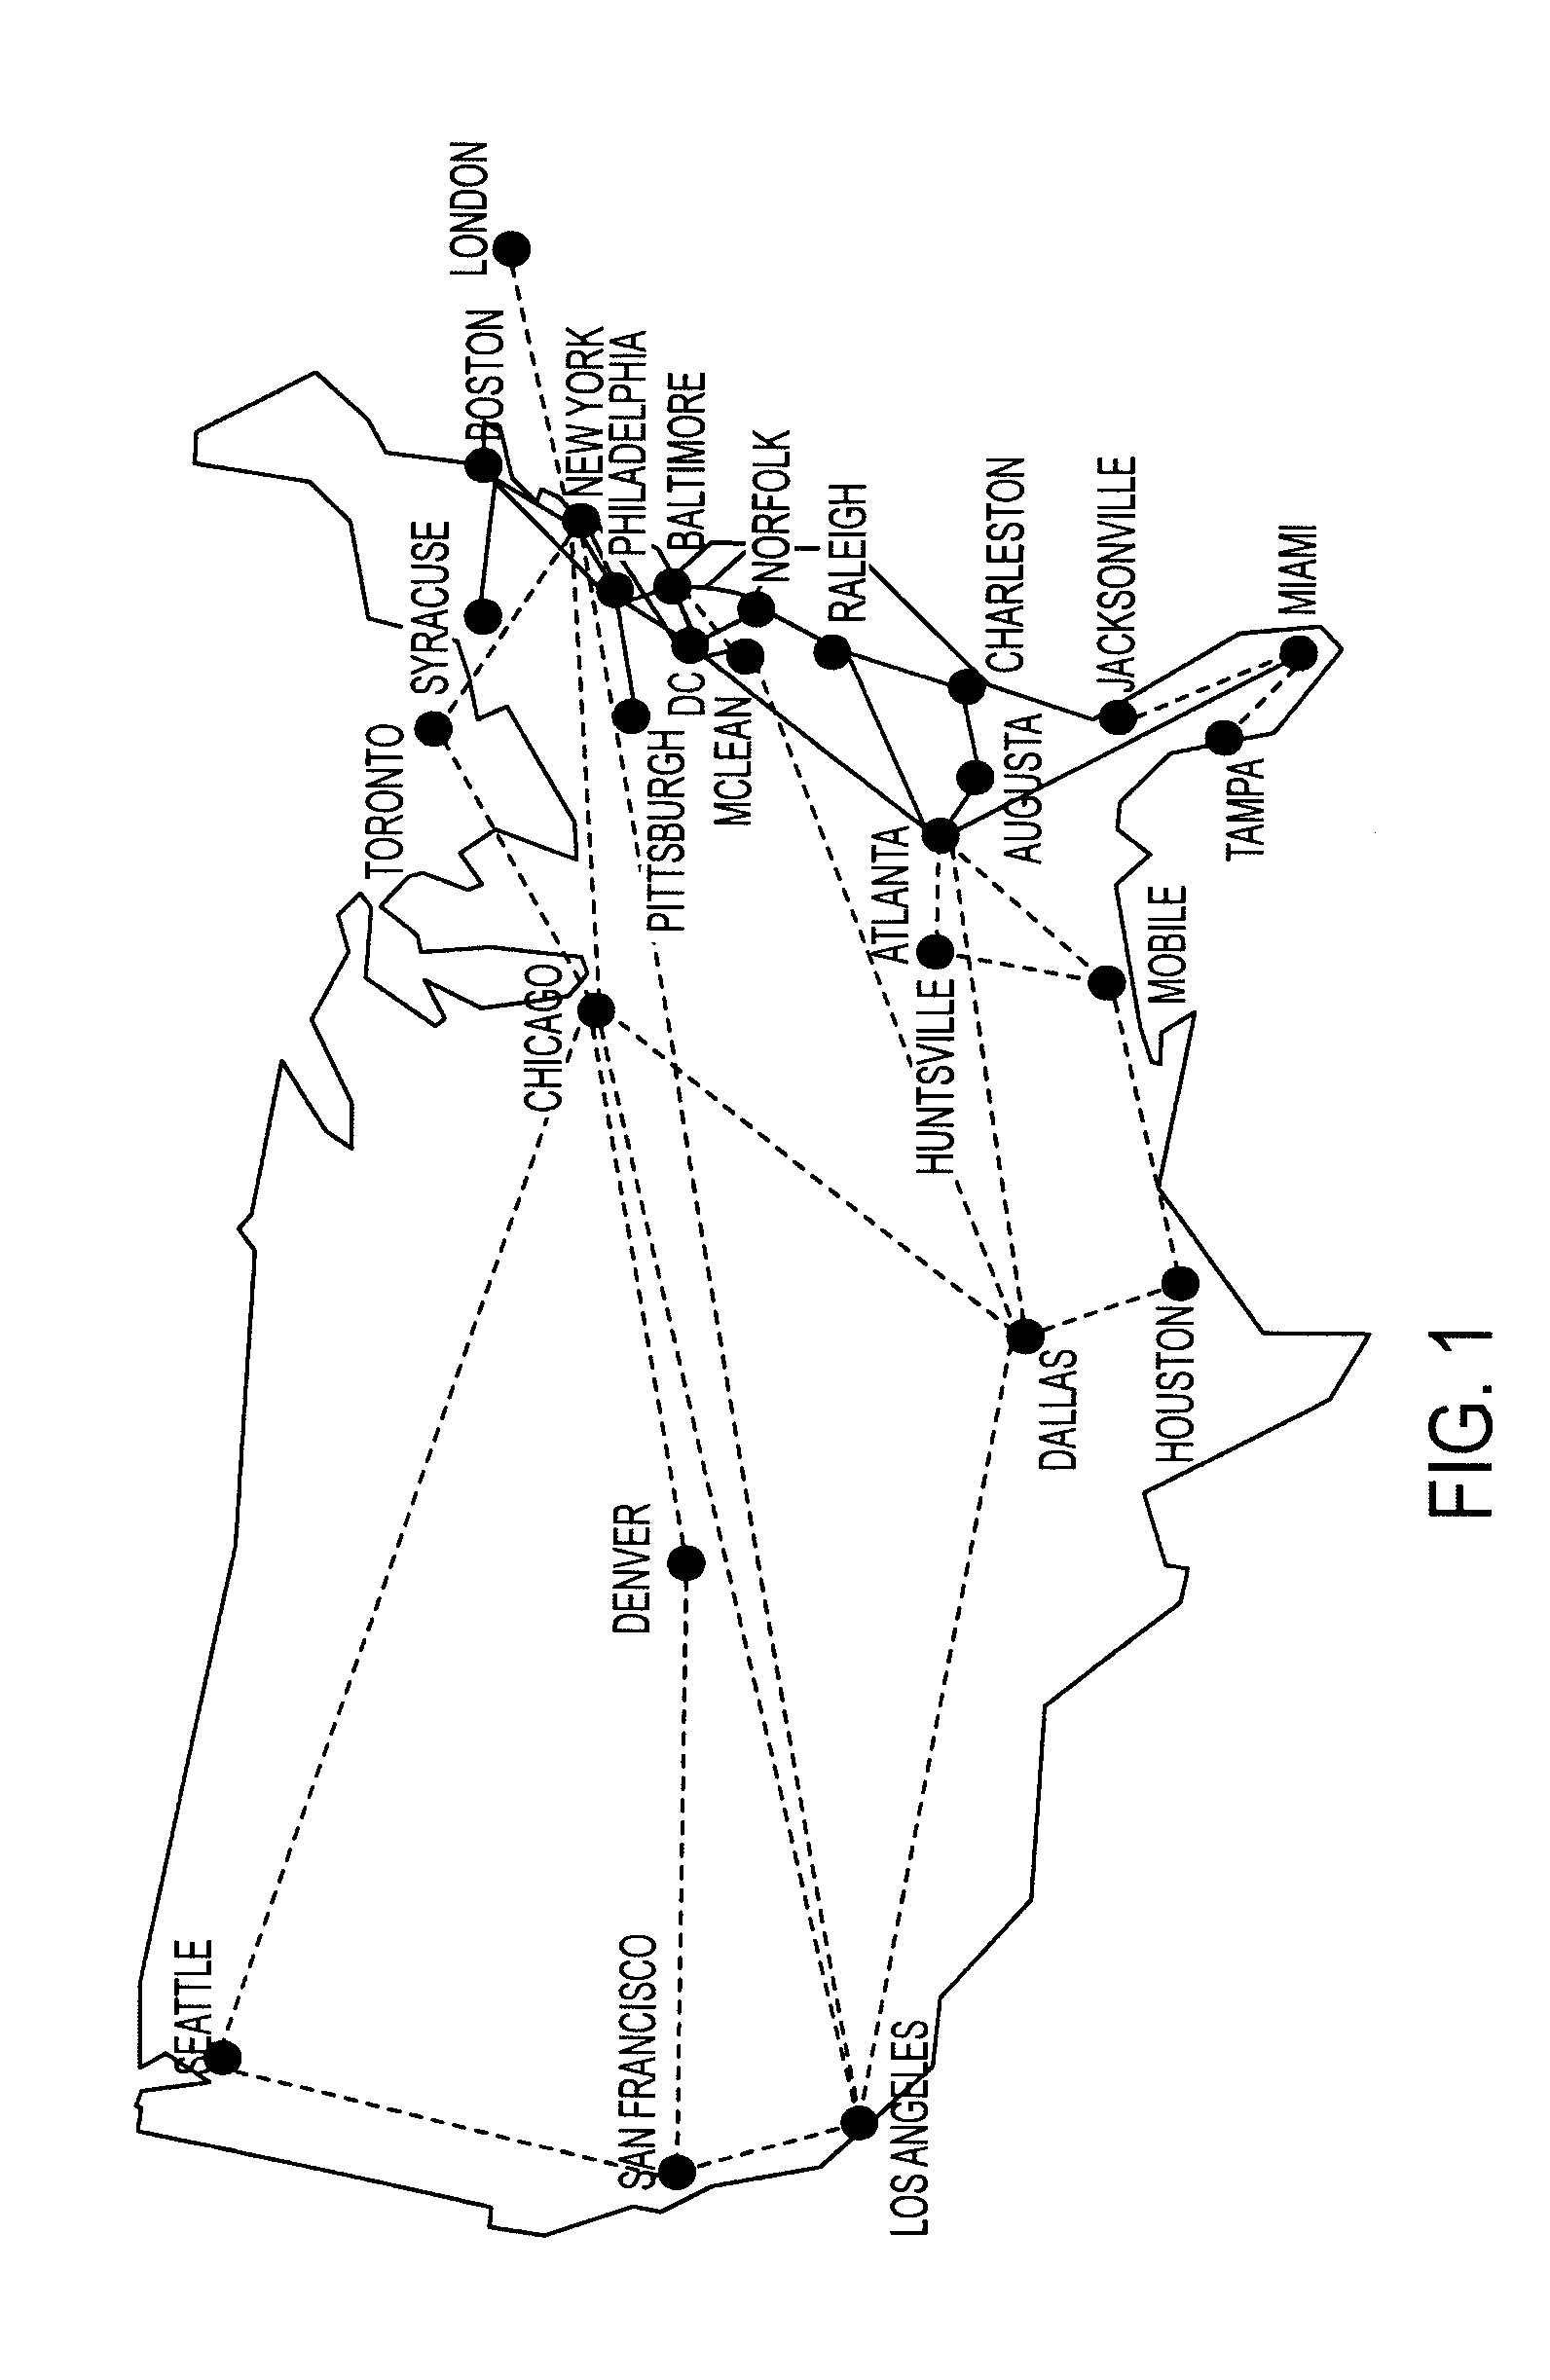 System and method for provisioning and managing network access and connectivity